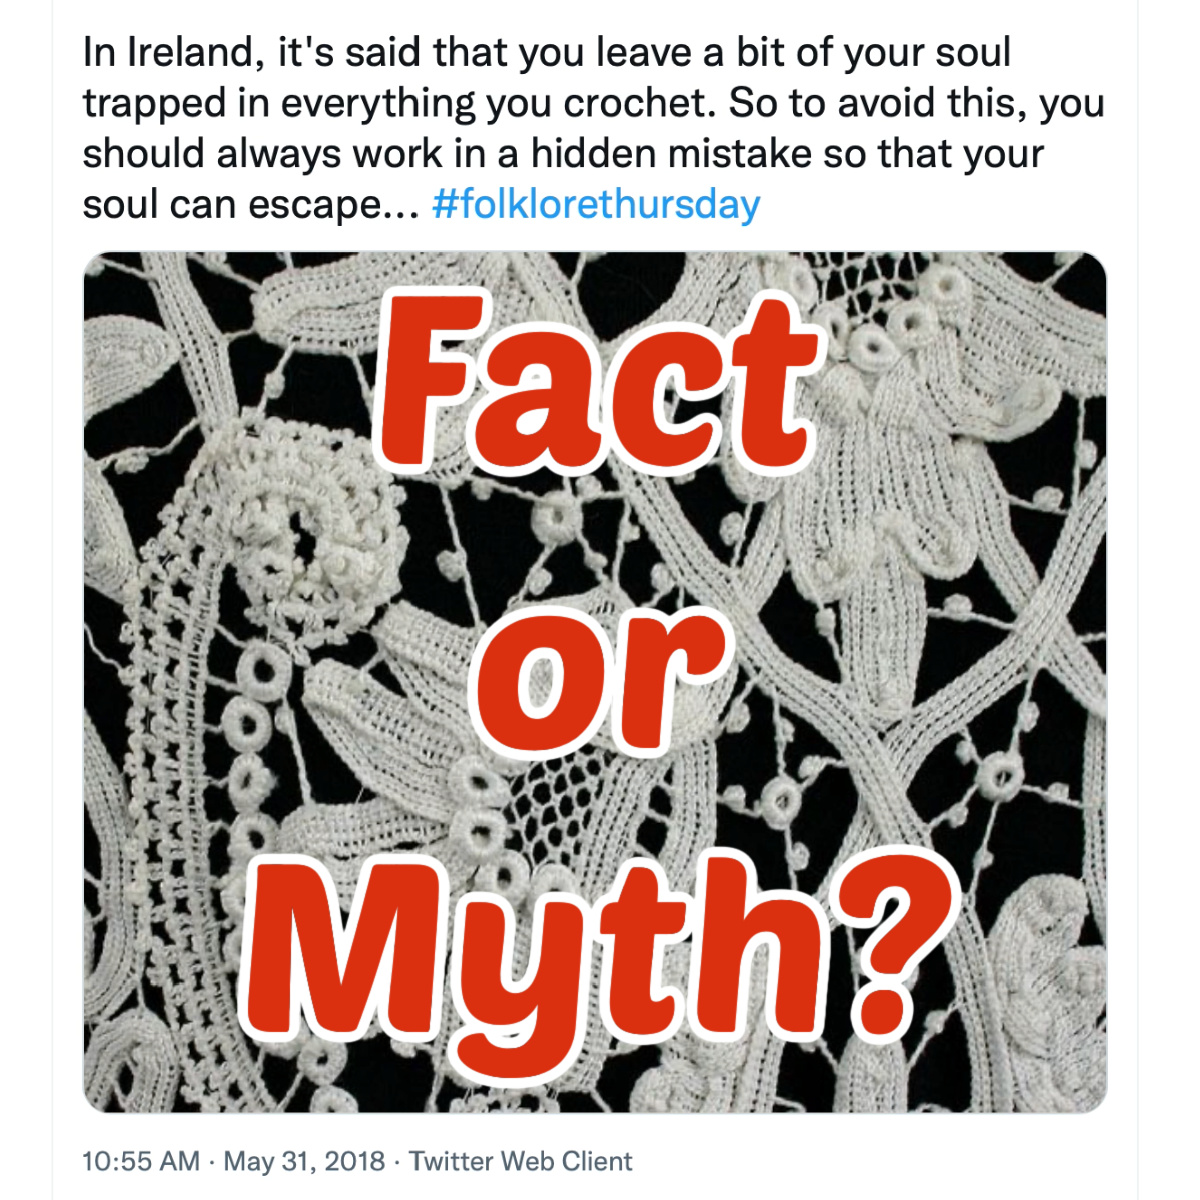 Fact or Myth?: In Ireland, it's said that you leave a bit of your soul trapped in everything you crochet. So to avoid this, you should always work in a hidden mistake so that your soul can escape..."